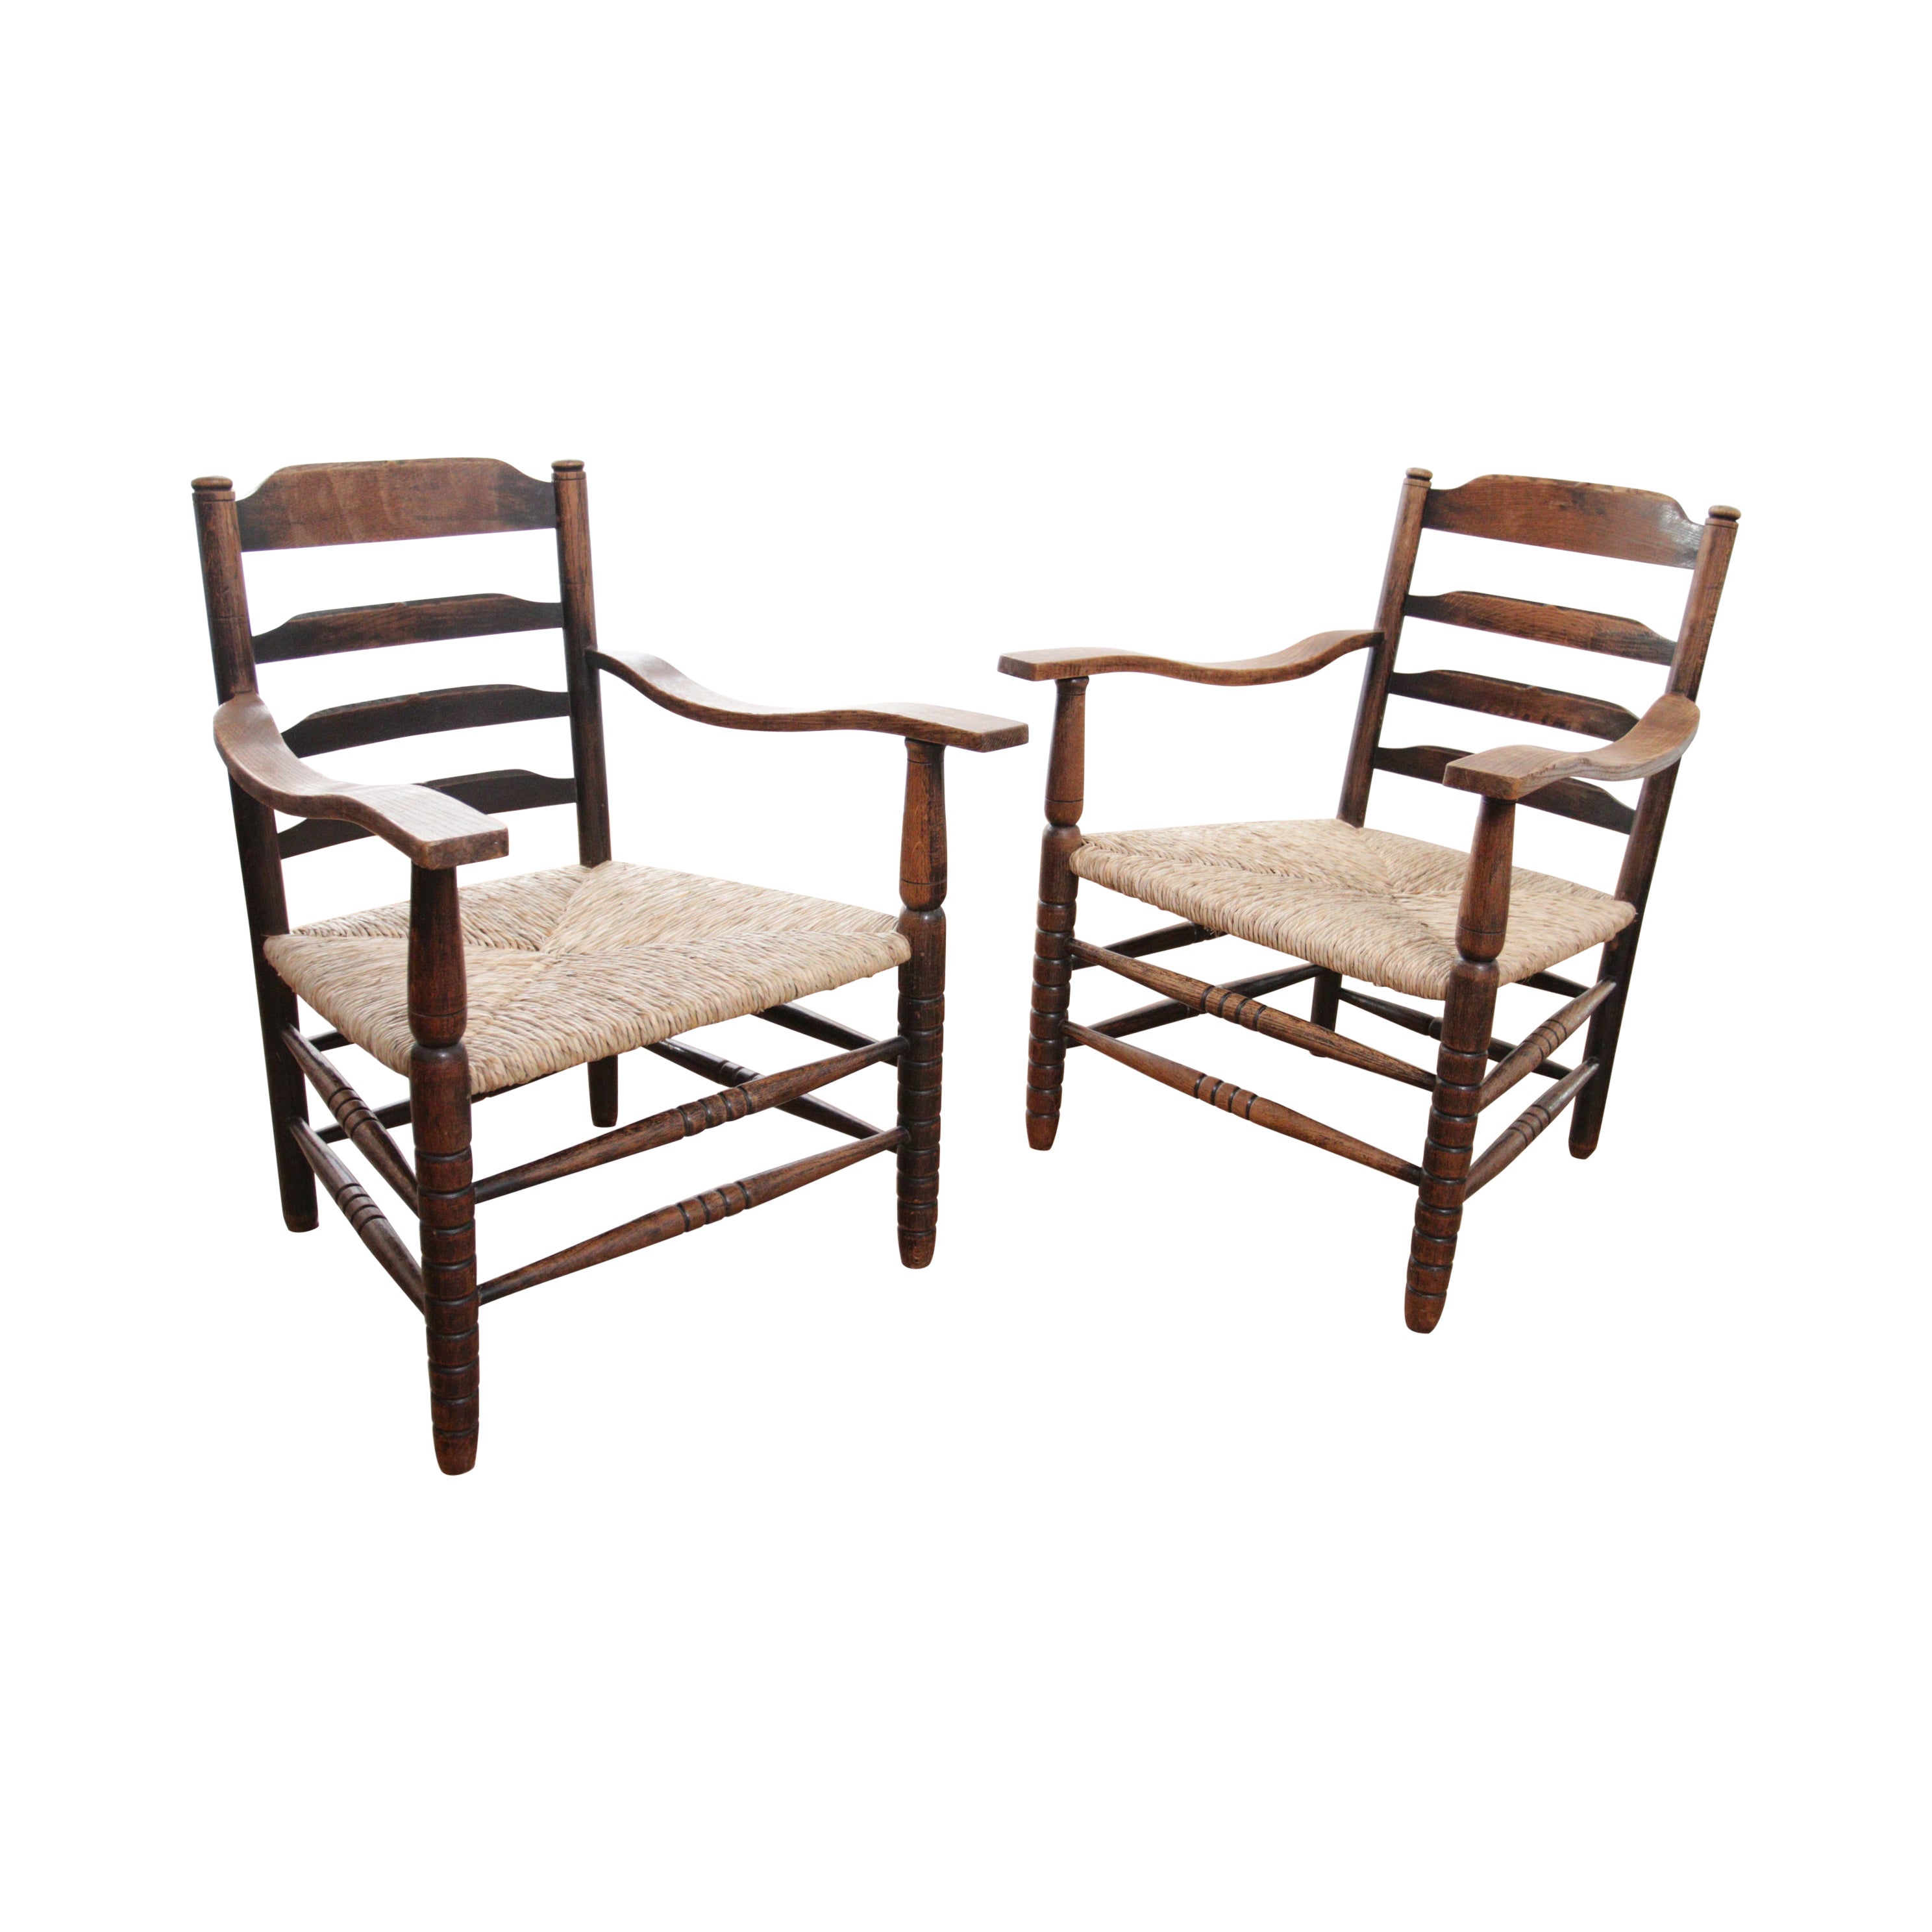 Two Charming Dutch Rural Ladder Back Oak Rush Seat Armchairs 1920's For Sale